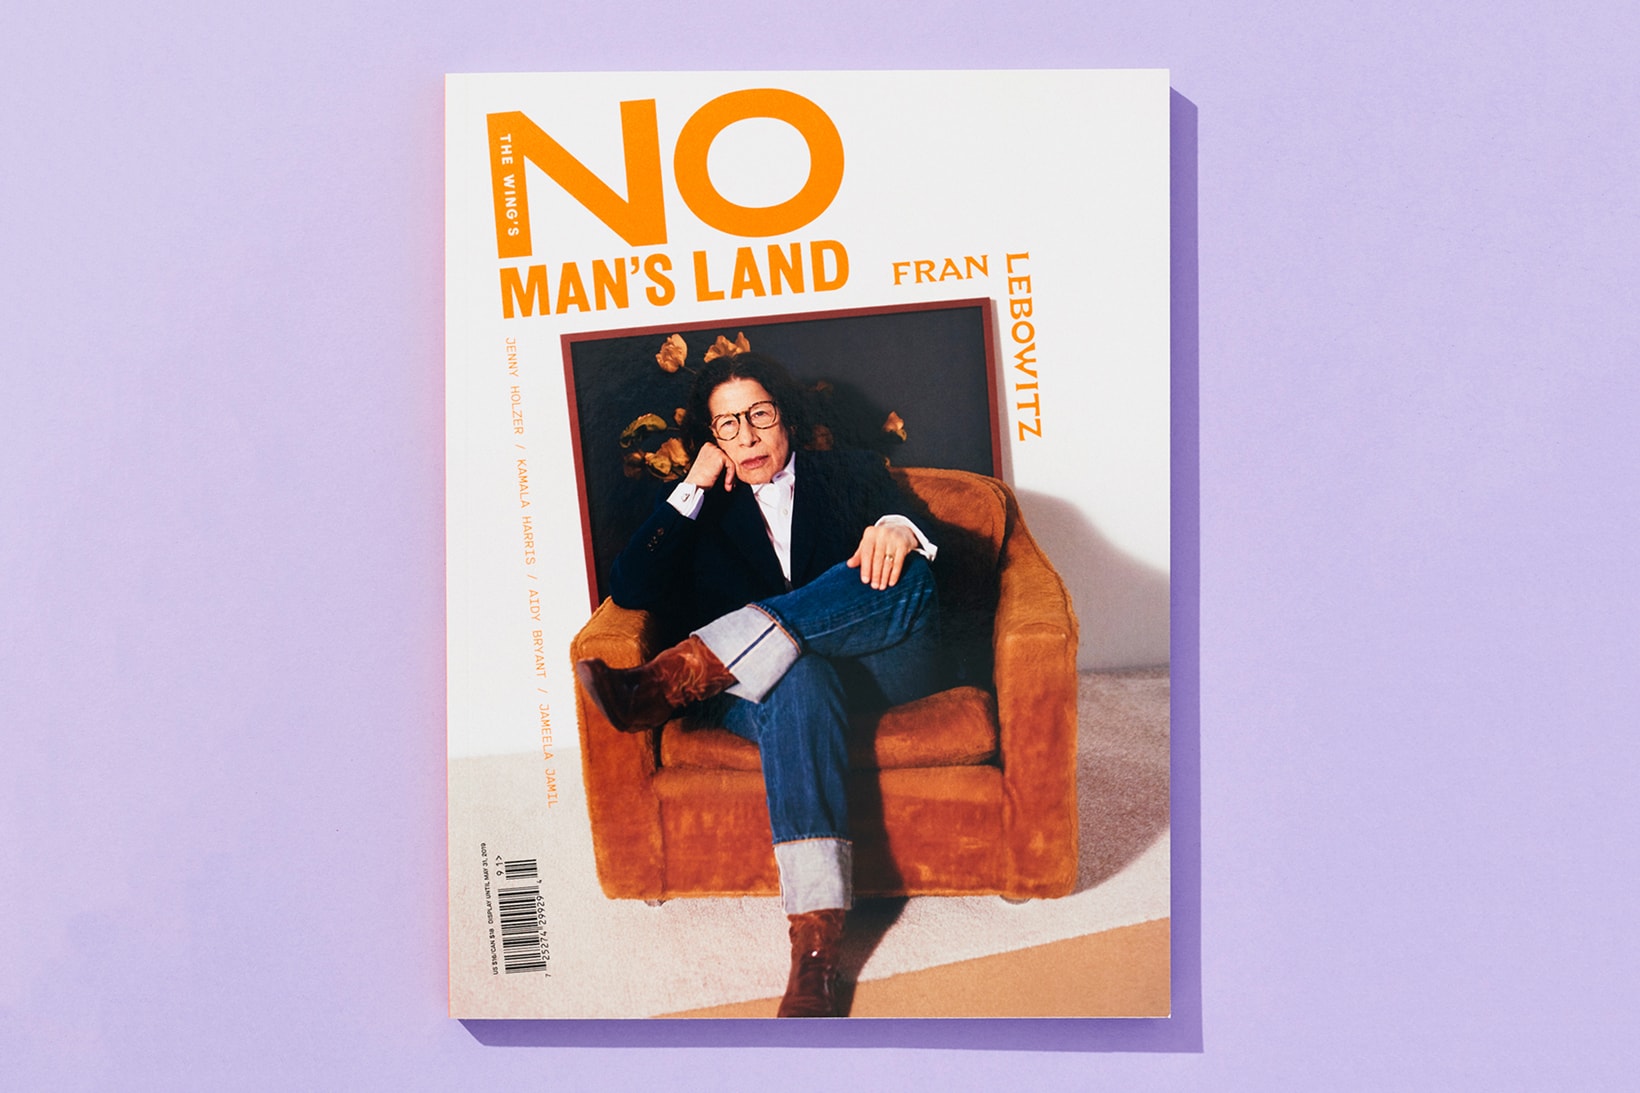 The Wing Spring 2019 Issue 3 No Man's Land Fran Lebowitz Jacket Black Pants Blue